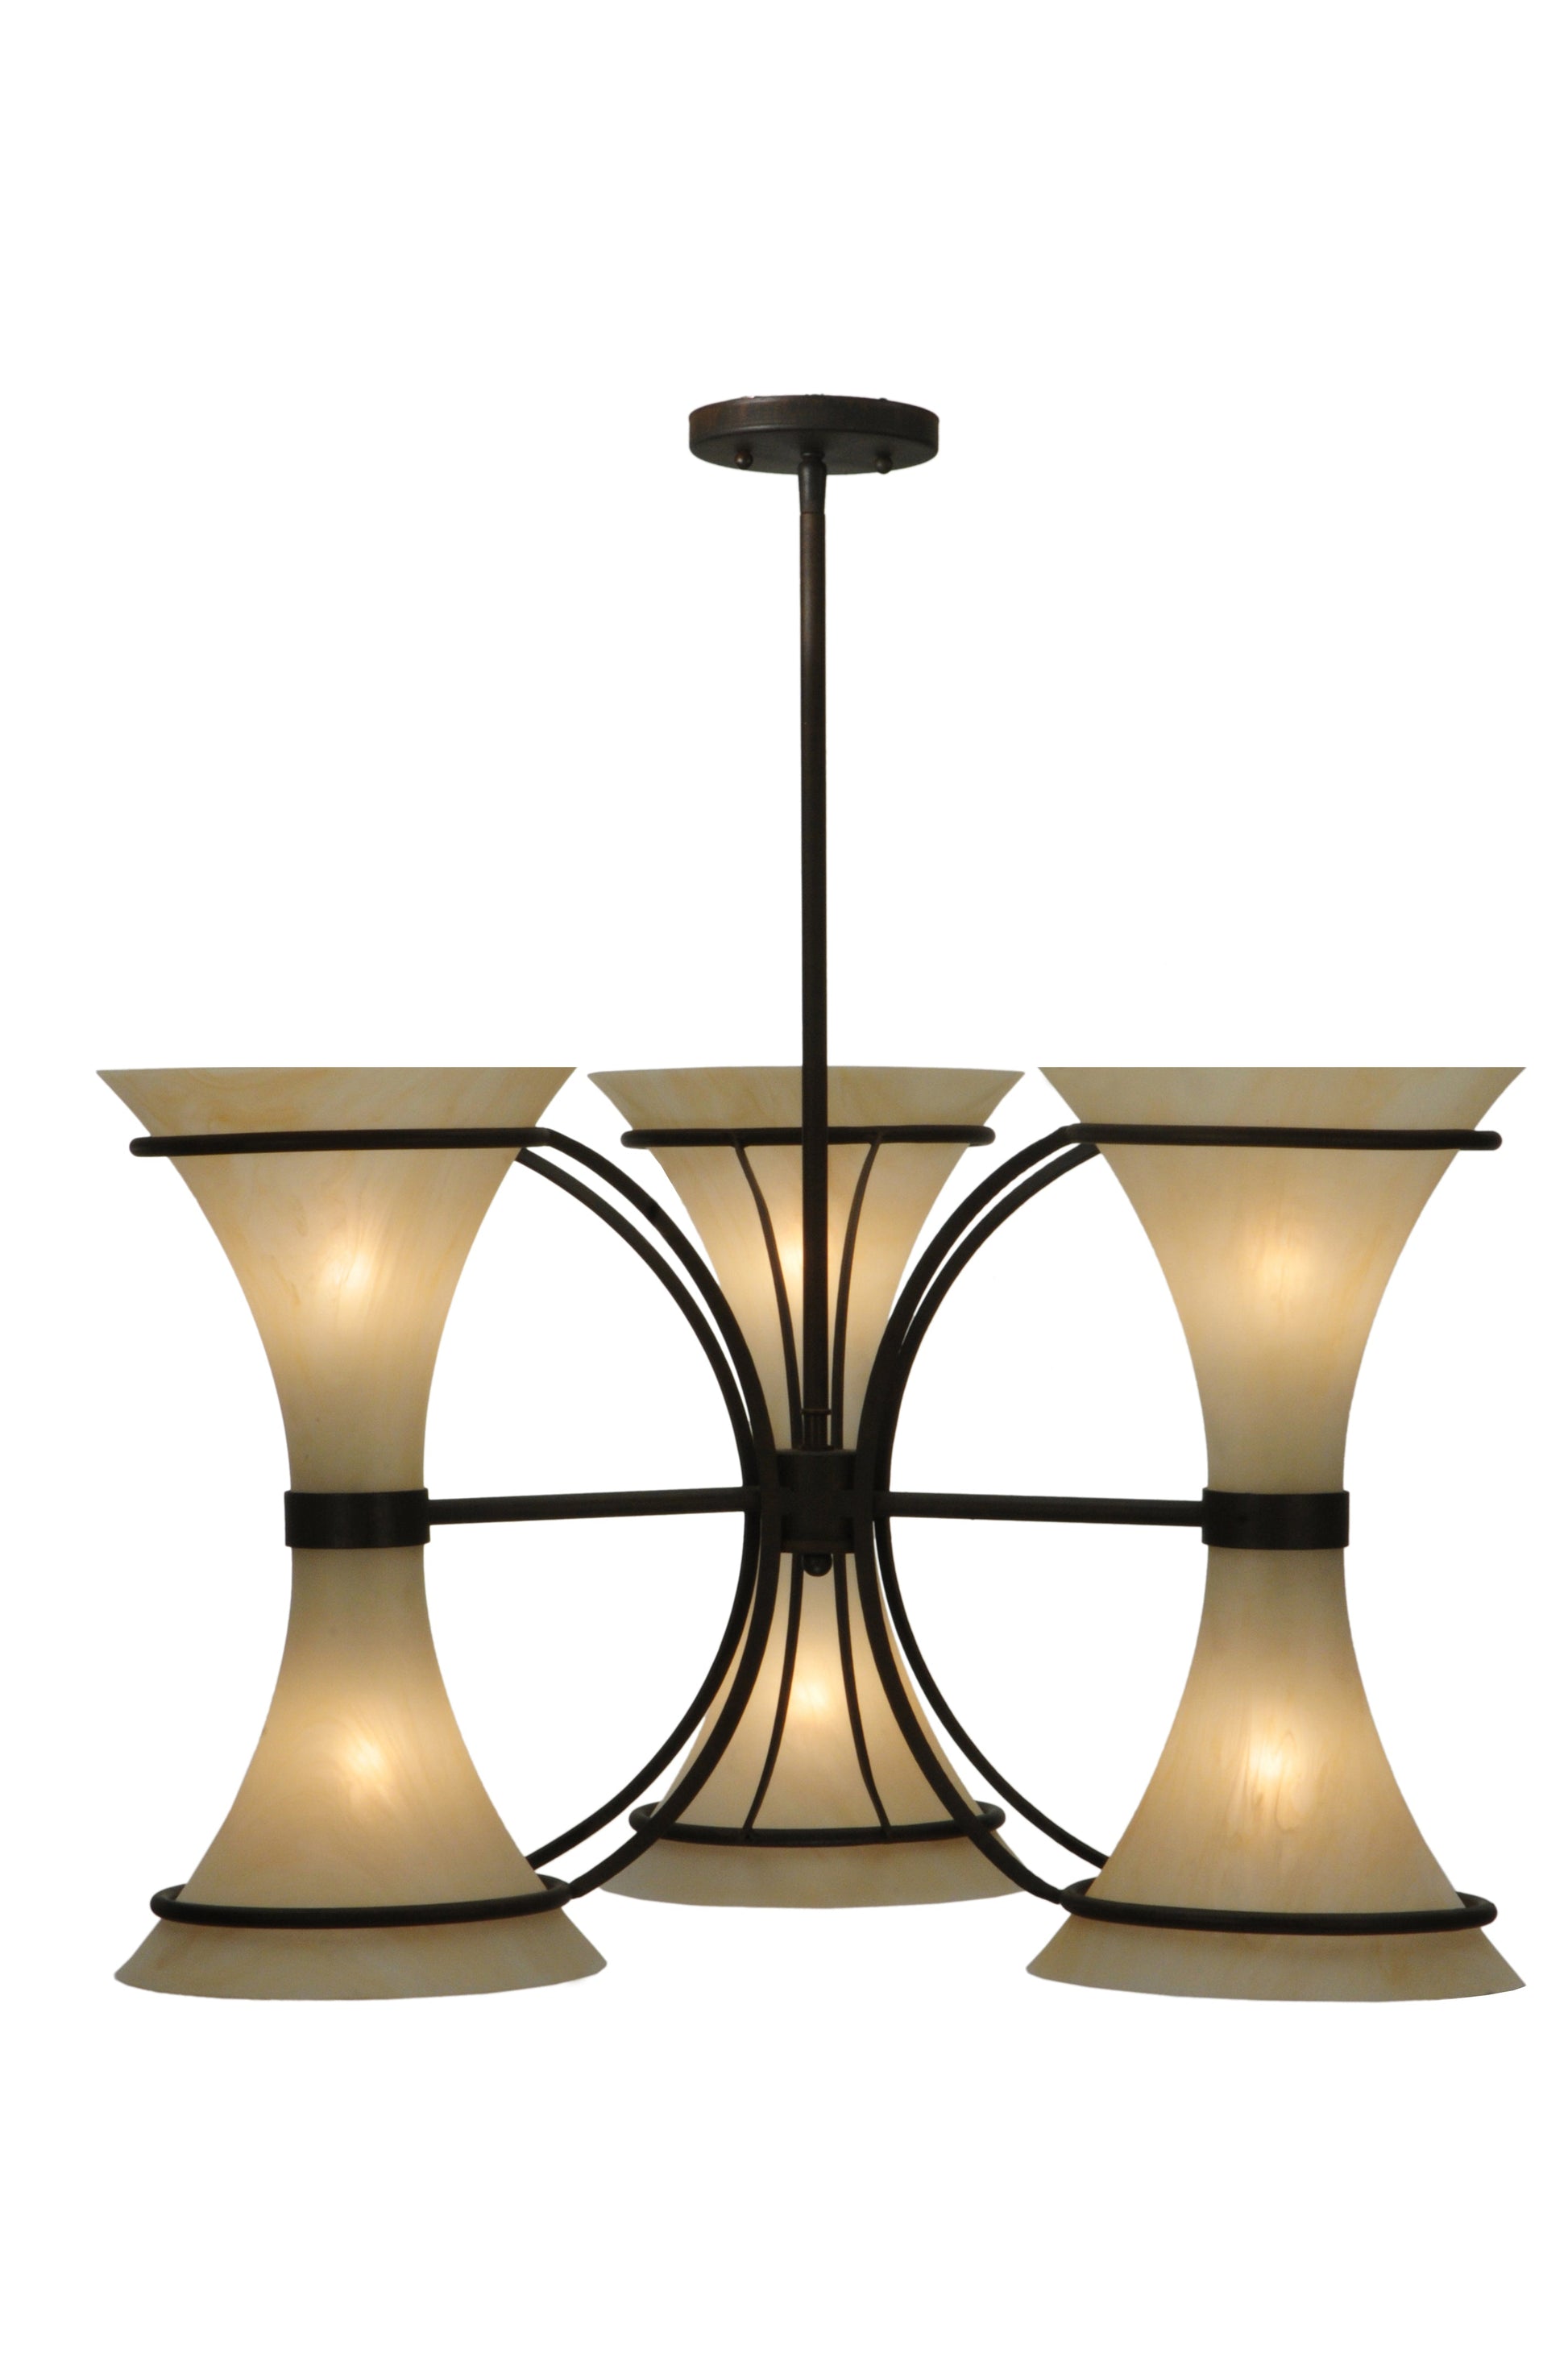 30" Chronos 3 Arm Chandelier by 2nd Ave Lighting